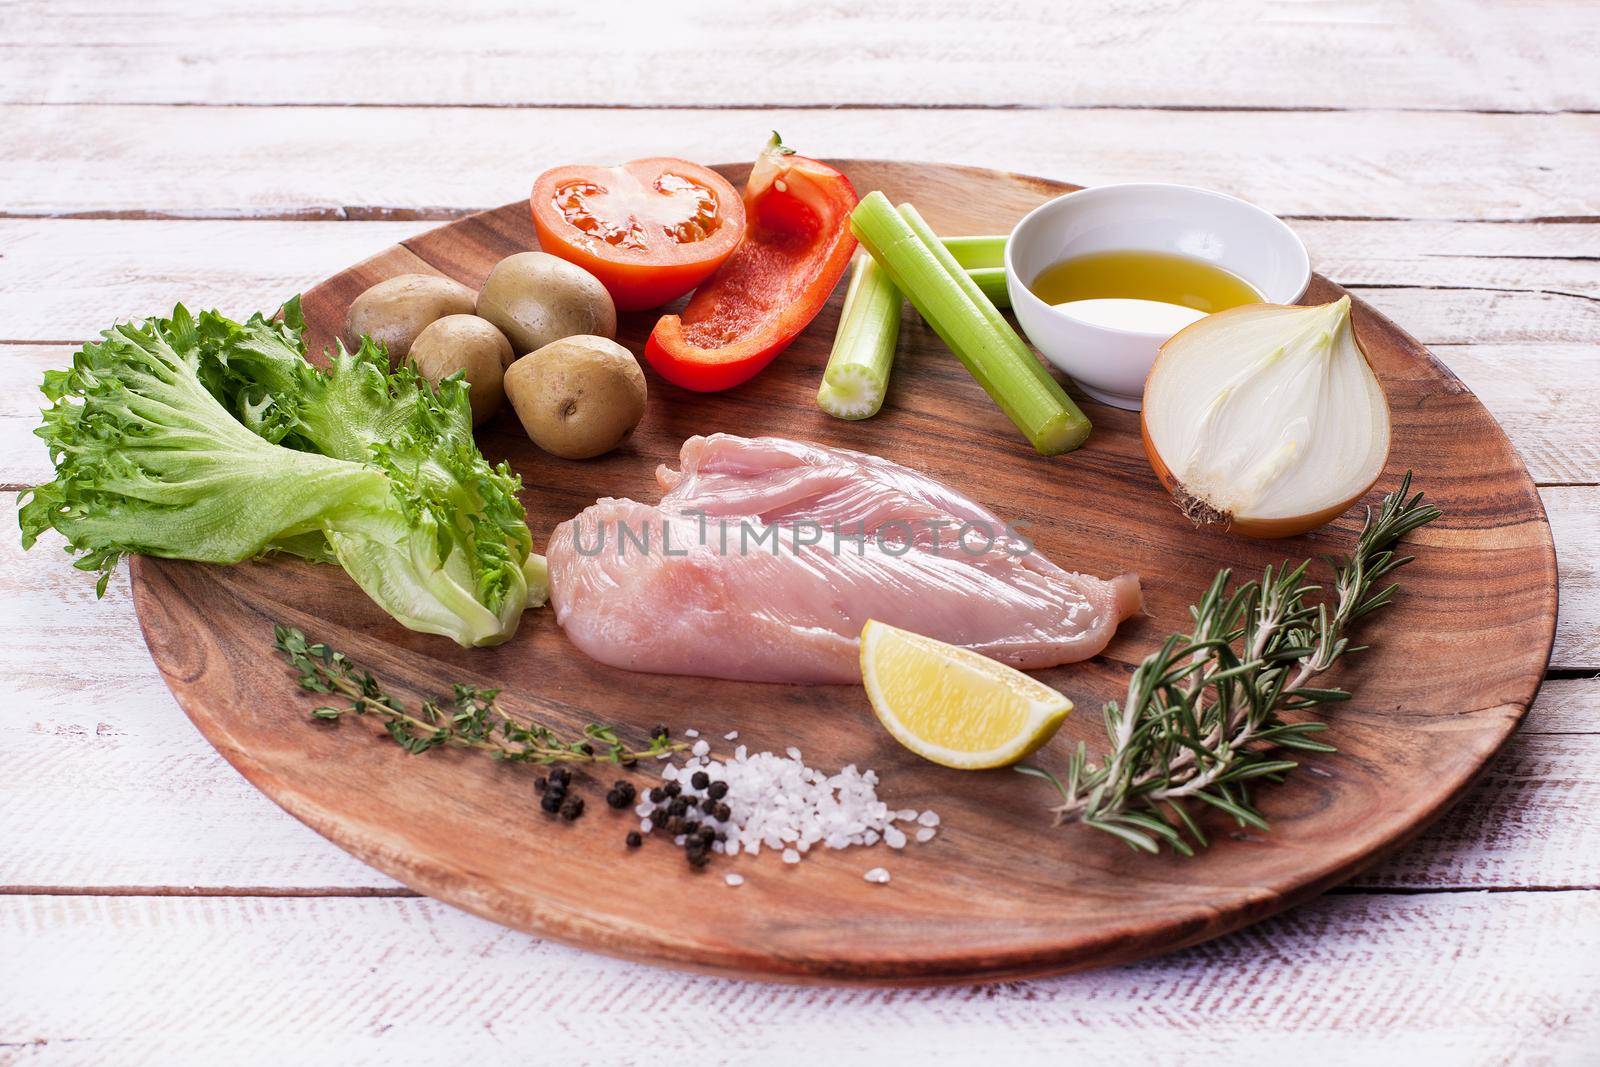 Ingredients for vegetable salad with chicken breast on a wooden plate. Stock image.